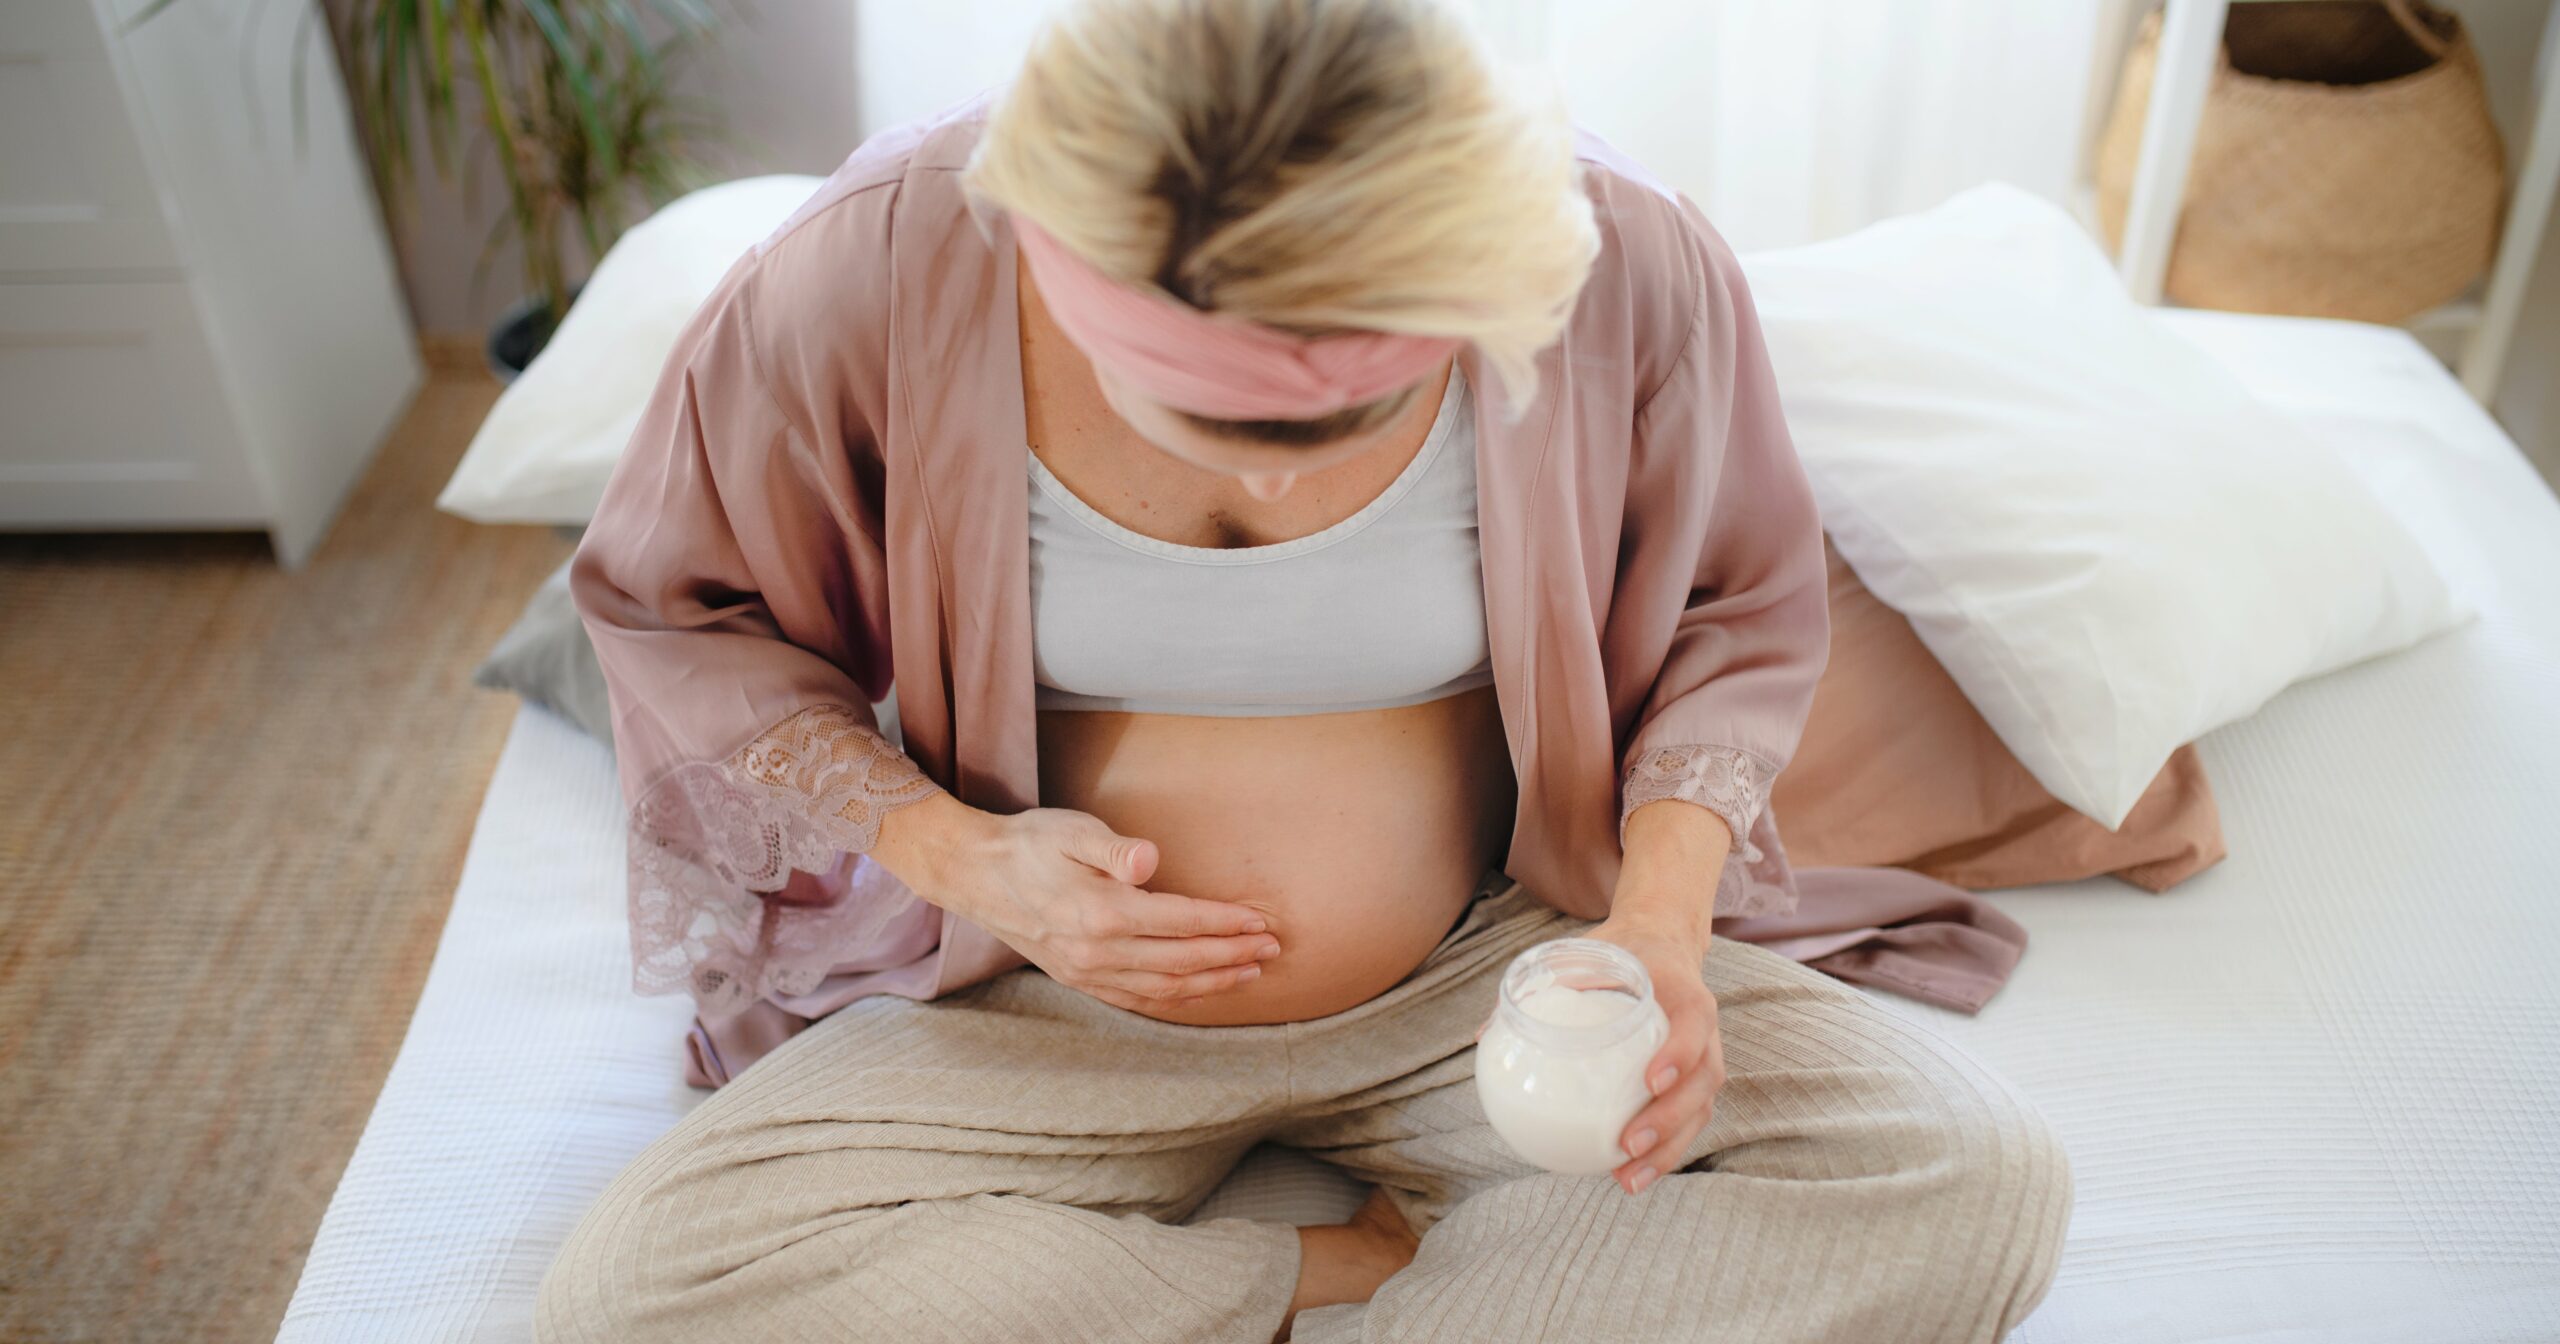 the-pregnancy-belly-salve-that’s-still-saving-my-skin-from-itch-(months-after-giving-birth)